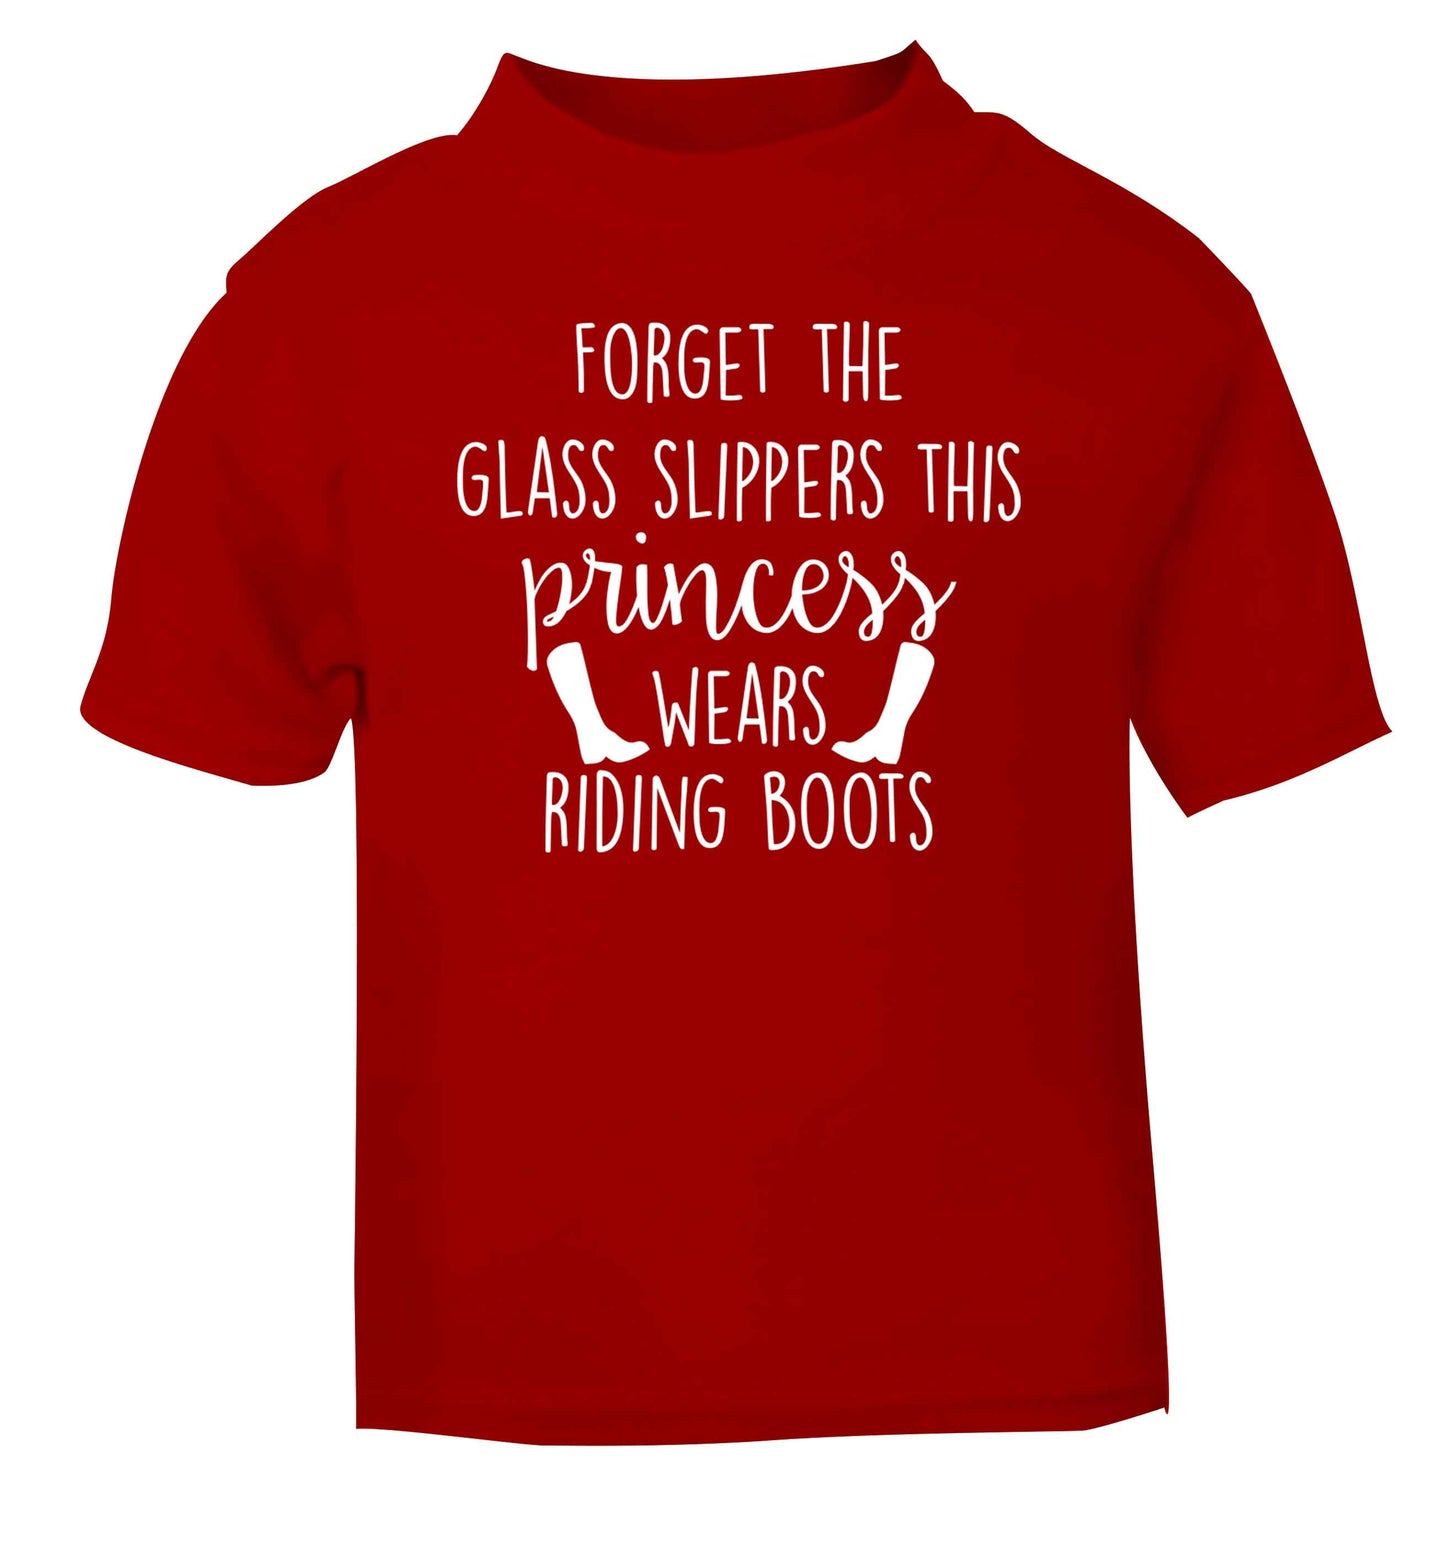 Forget the glass slippers this princess wears riding boots red baby toddler Tshirt 2 Years